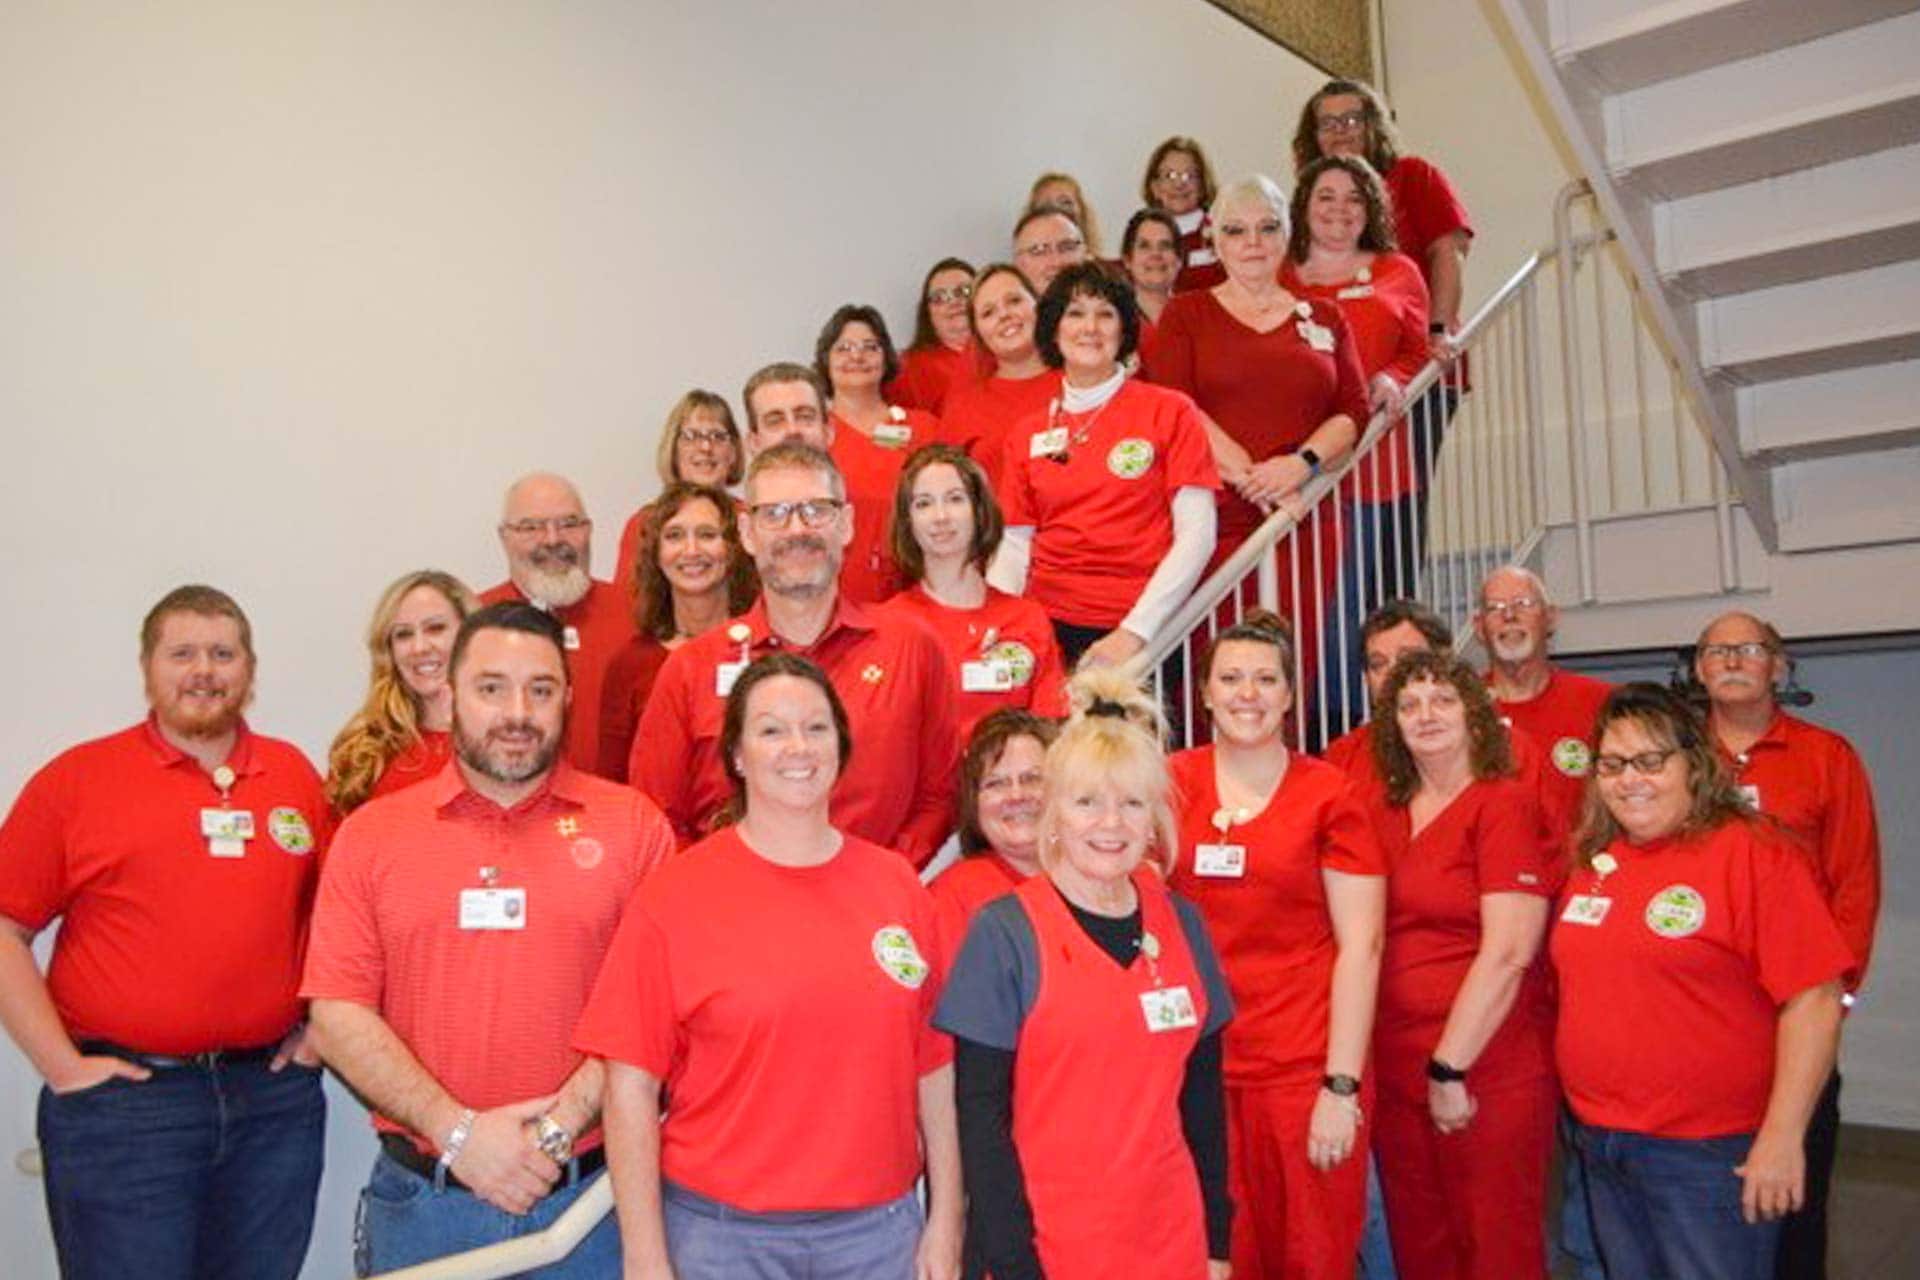 Members of the Mon Health Stonewall Jackson Memorial Hospital staff gathered on Friday, February 7, to raise public awareness of cardiac conditions and associated symptoms.